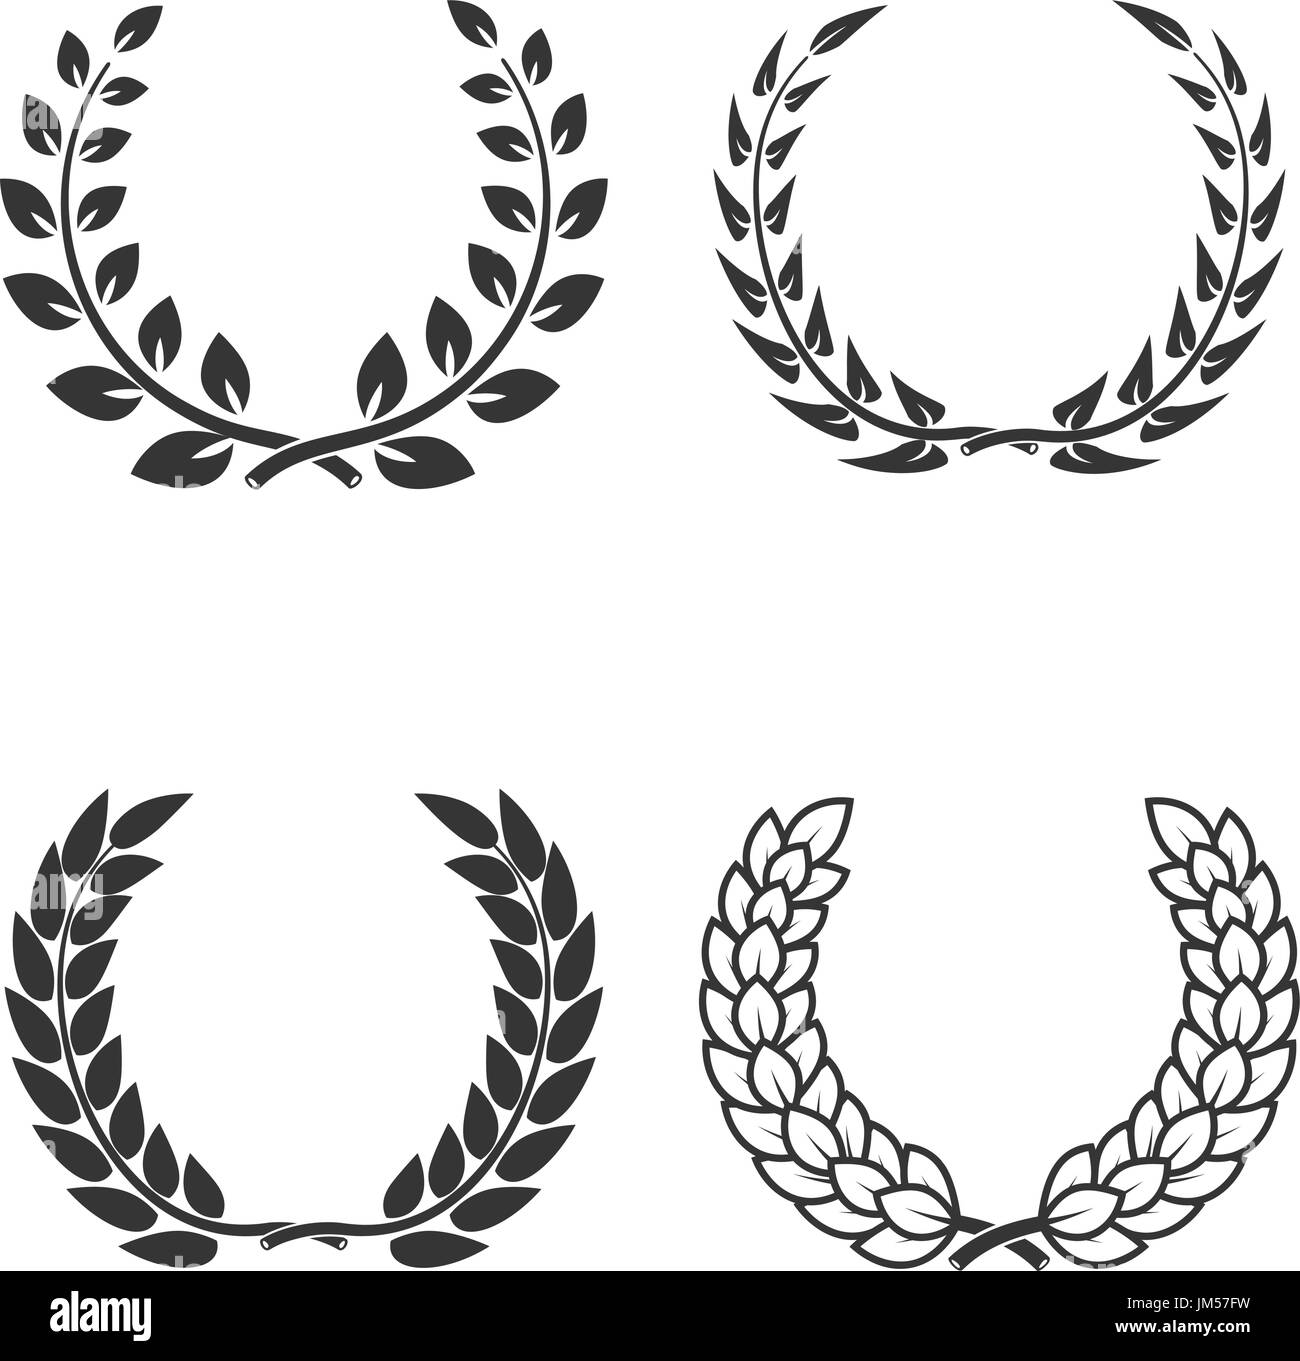 Set Of Laurel Wreaths Isolated On White Background Design Element For